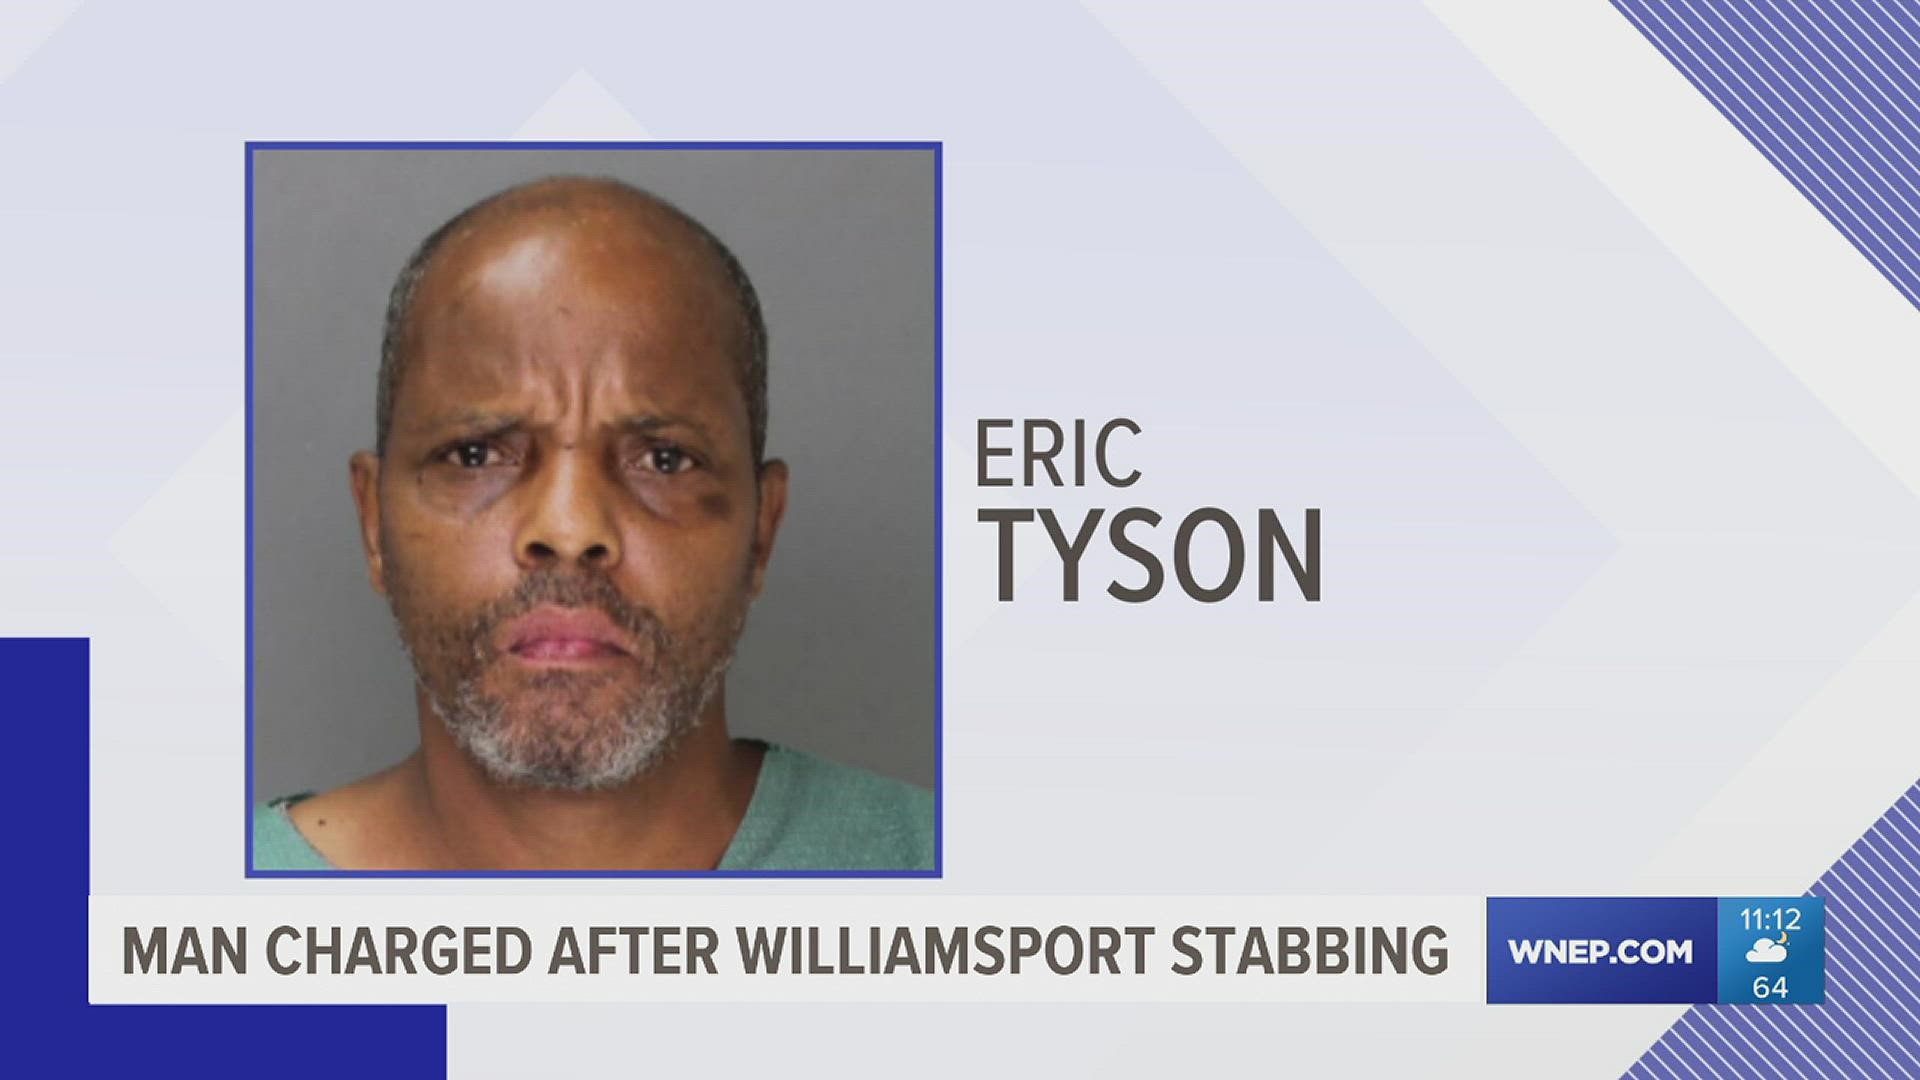 A man is locked up on attempted homicide charges after a stabbing in Williamsport.